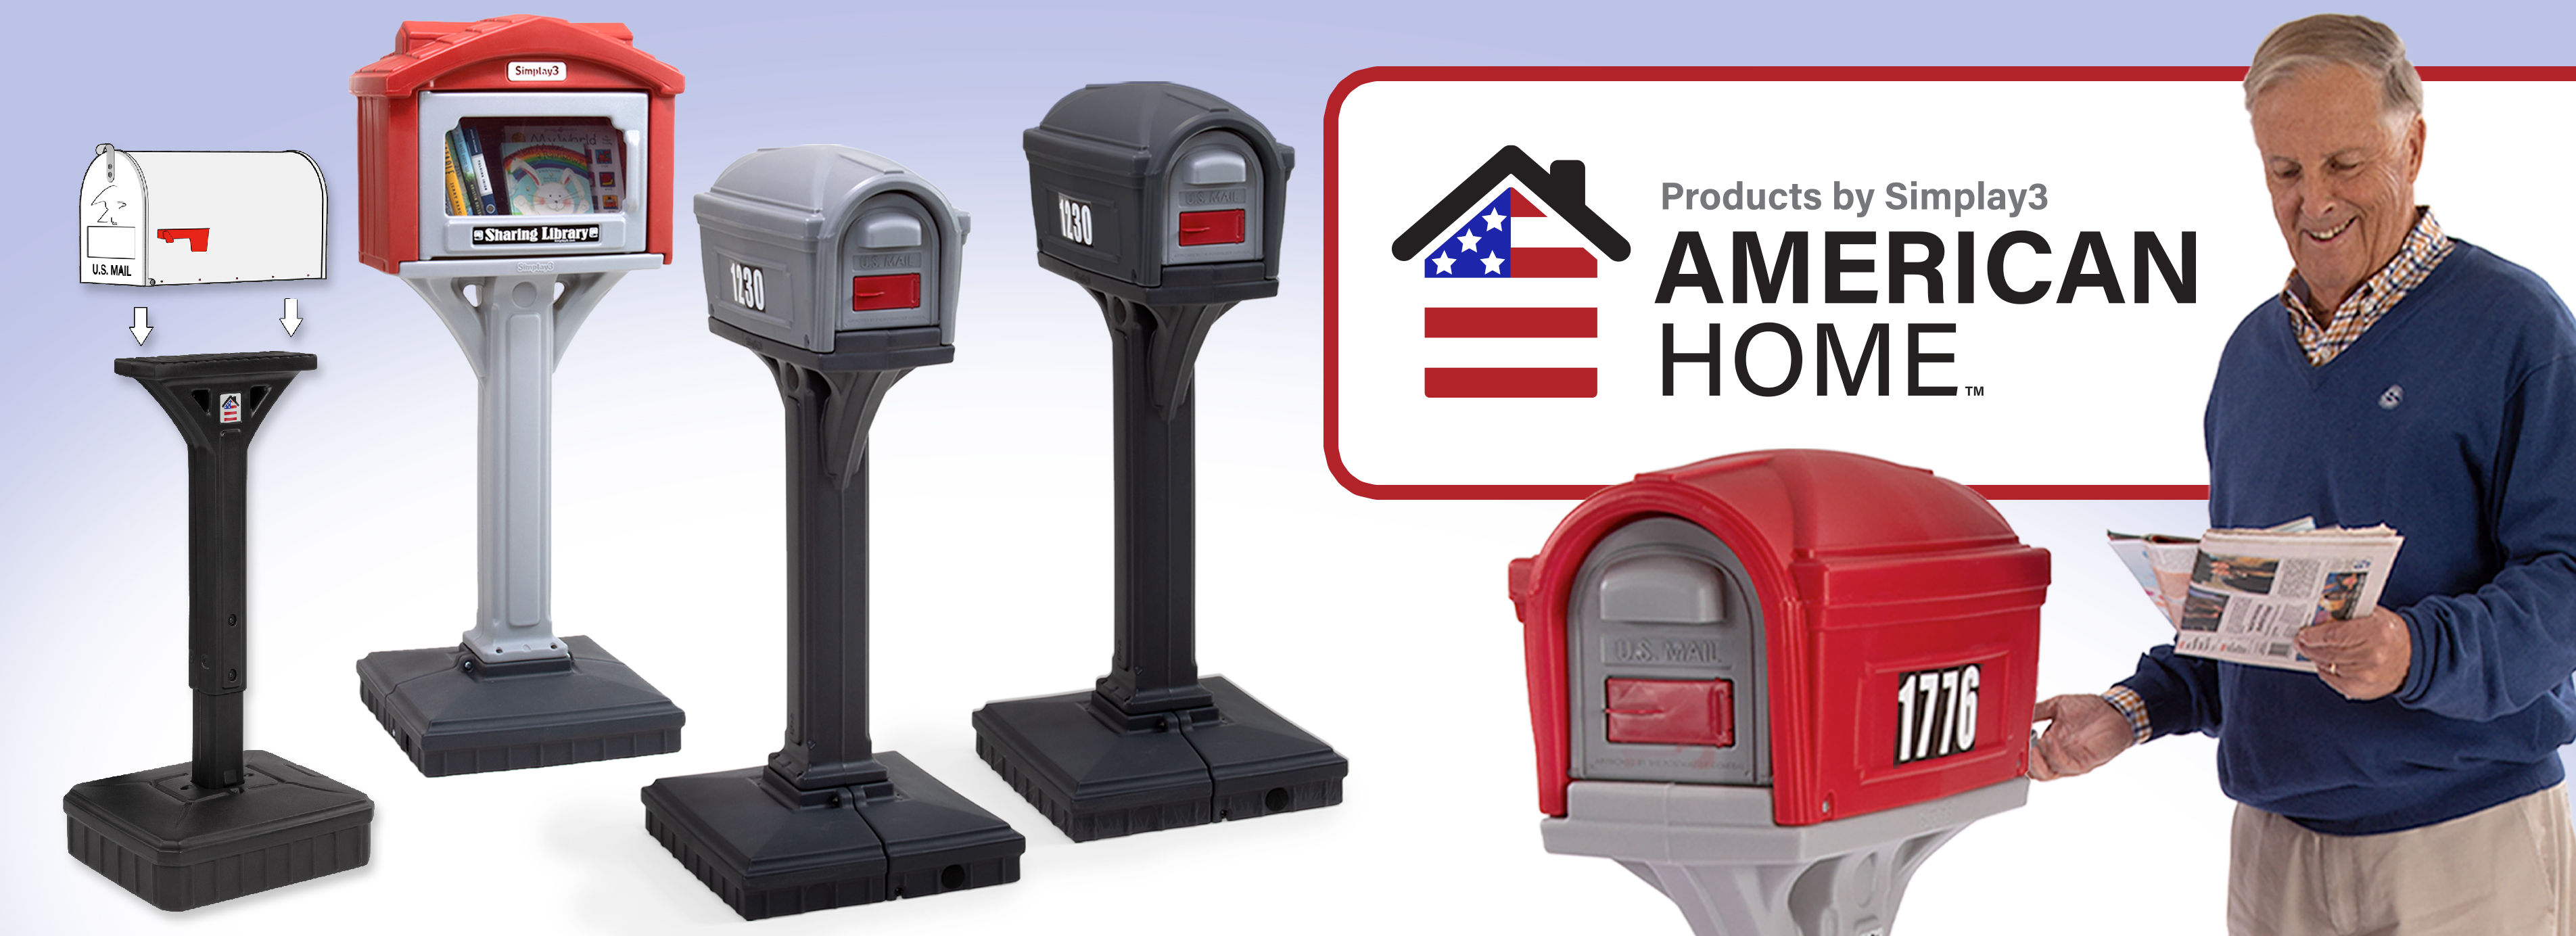 Products by Simplay3 - American Home